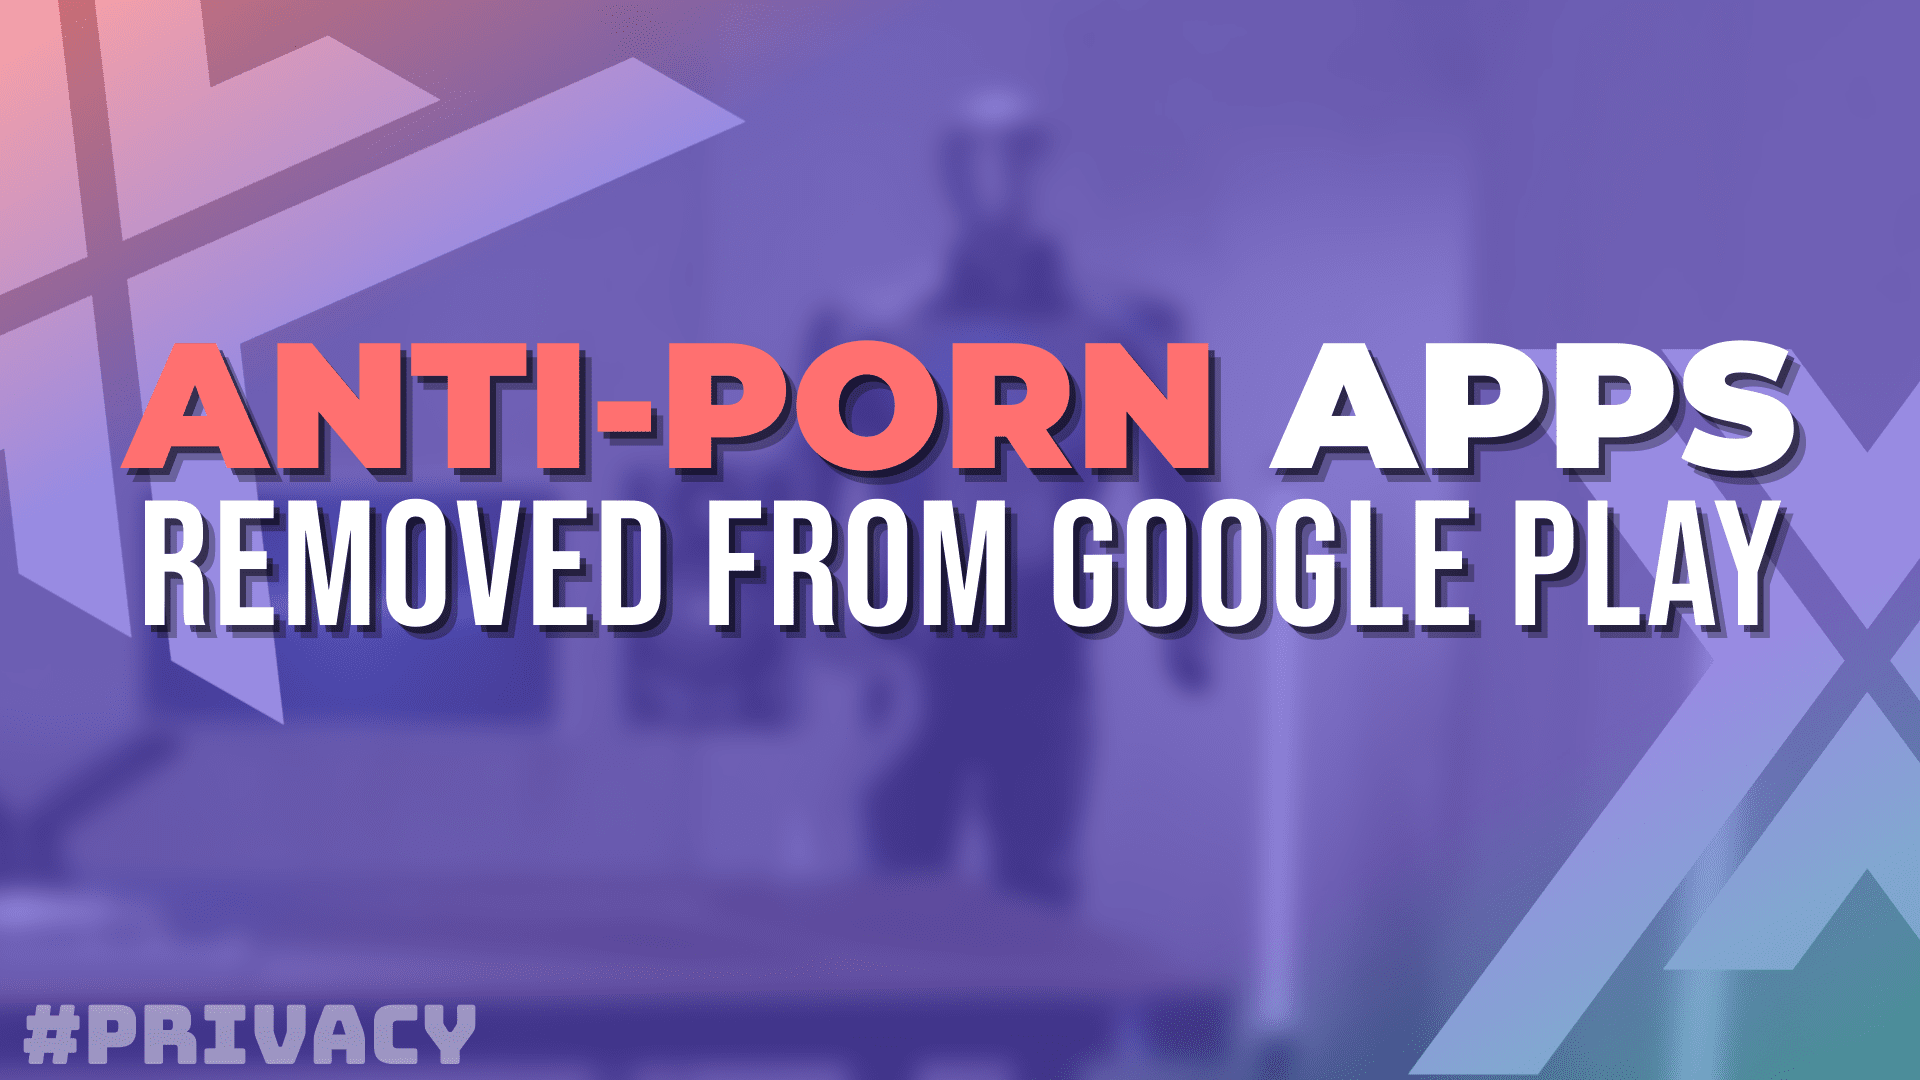 Anti-porn ‘shameware’ apps removed from Google Play for breaking privacy rules